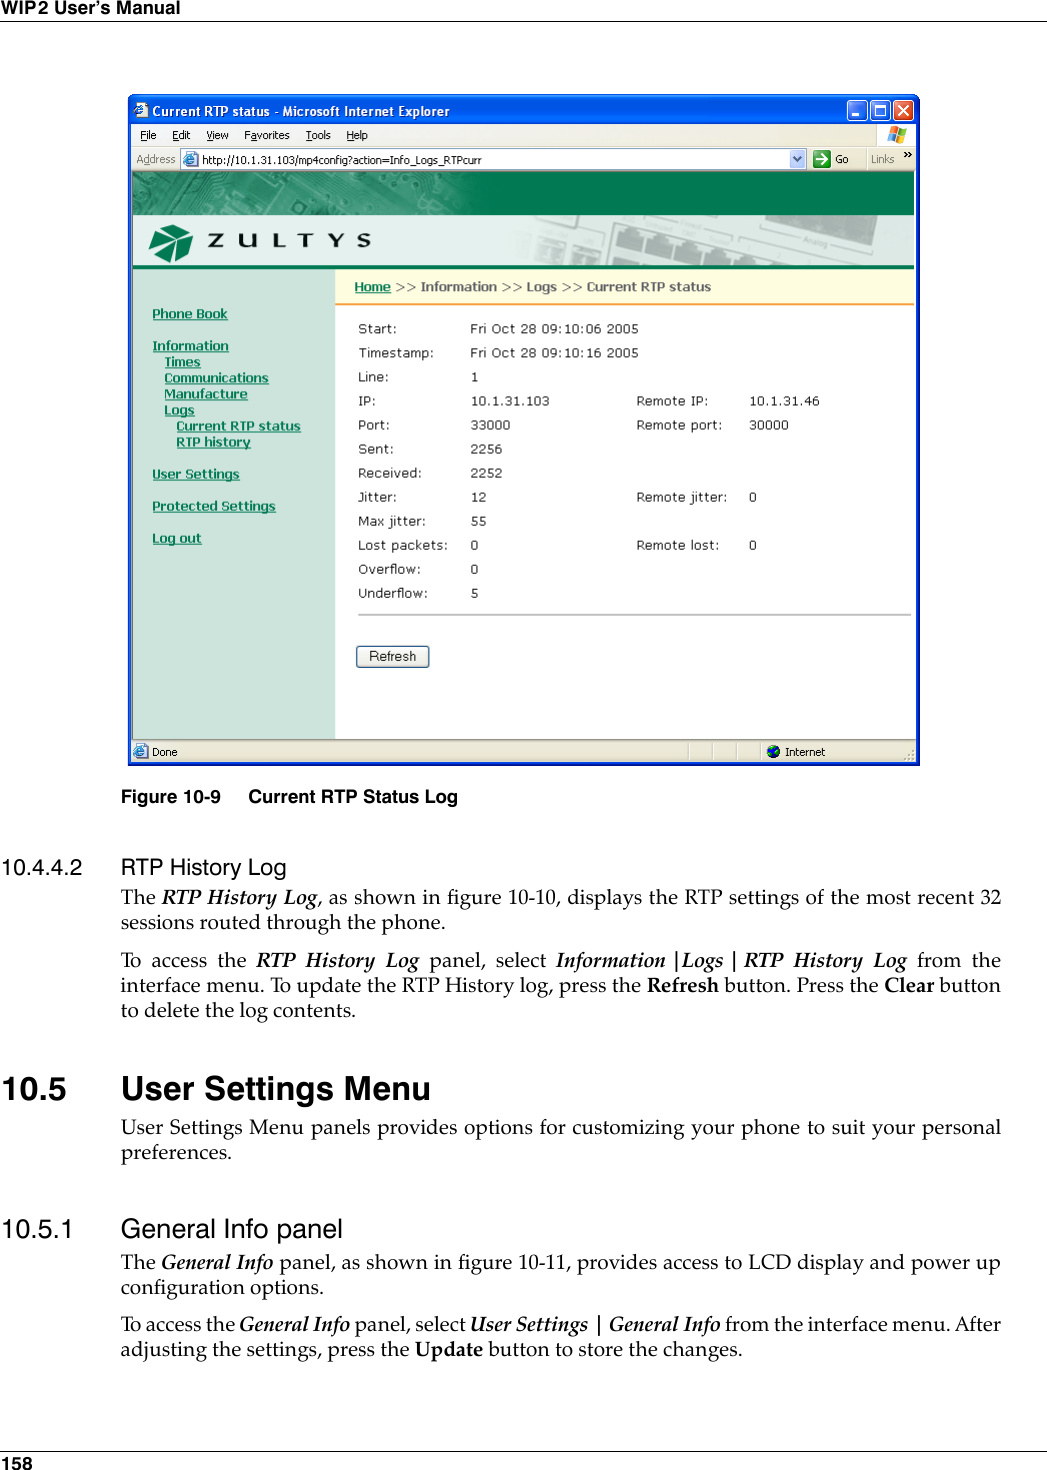 158WIP2 User’s Manual10.4.4.2 RTP History LogThe RTP History Log, as shown in figure 10-10, displays the RTP settings of the most recent 32sessions routed through the phone. To access the RTP History Log panel, select Information |Logs | RTP History Log from theinterface menu. To update the RTP History log, press the Refresh button. Press the Clear buttonto delete the log contents.10.5 User Settings MenuUser Settings Menu panels provides options for customizing your phone to suit your personalpreferences.10.5.1 General Info panelThe General Info panel, as shown in figure 10-11, provides access to LCD display and power upconfiguration options.To access the General Info panel, select User Settings | General Info from the interface menu. Afteradjusting the settings, press the Update button to store the changes.Figure 10-9 Current RTP Status Log